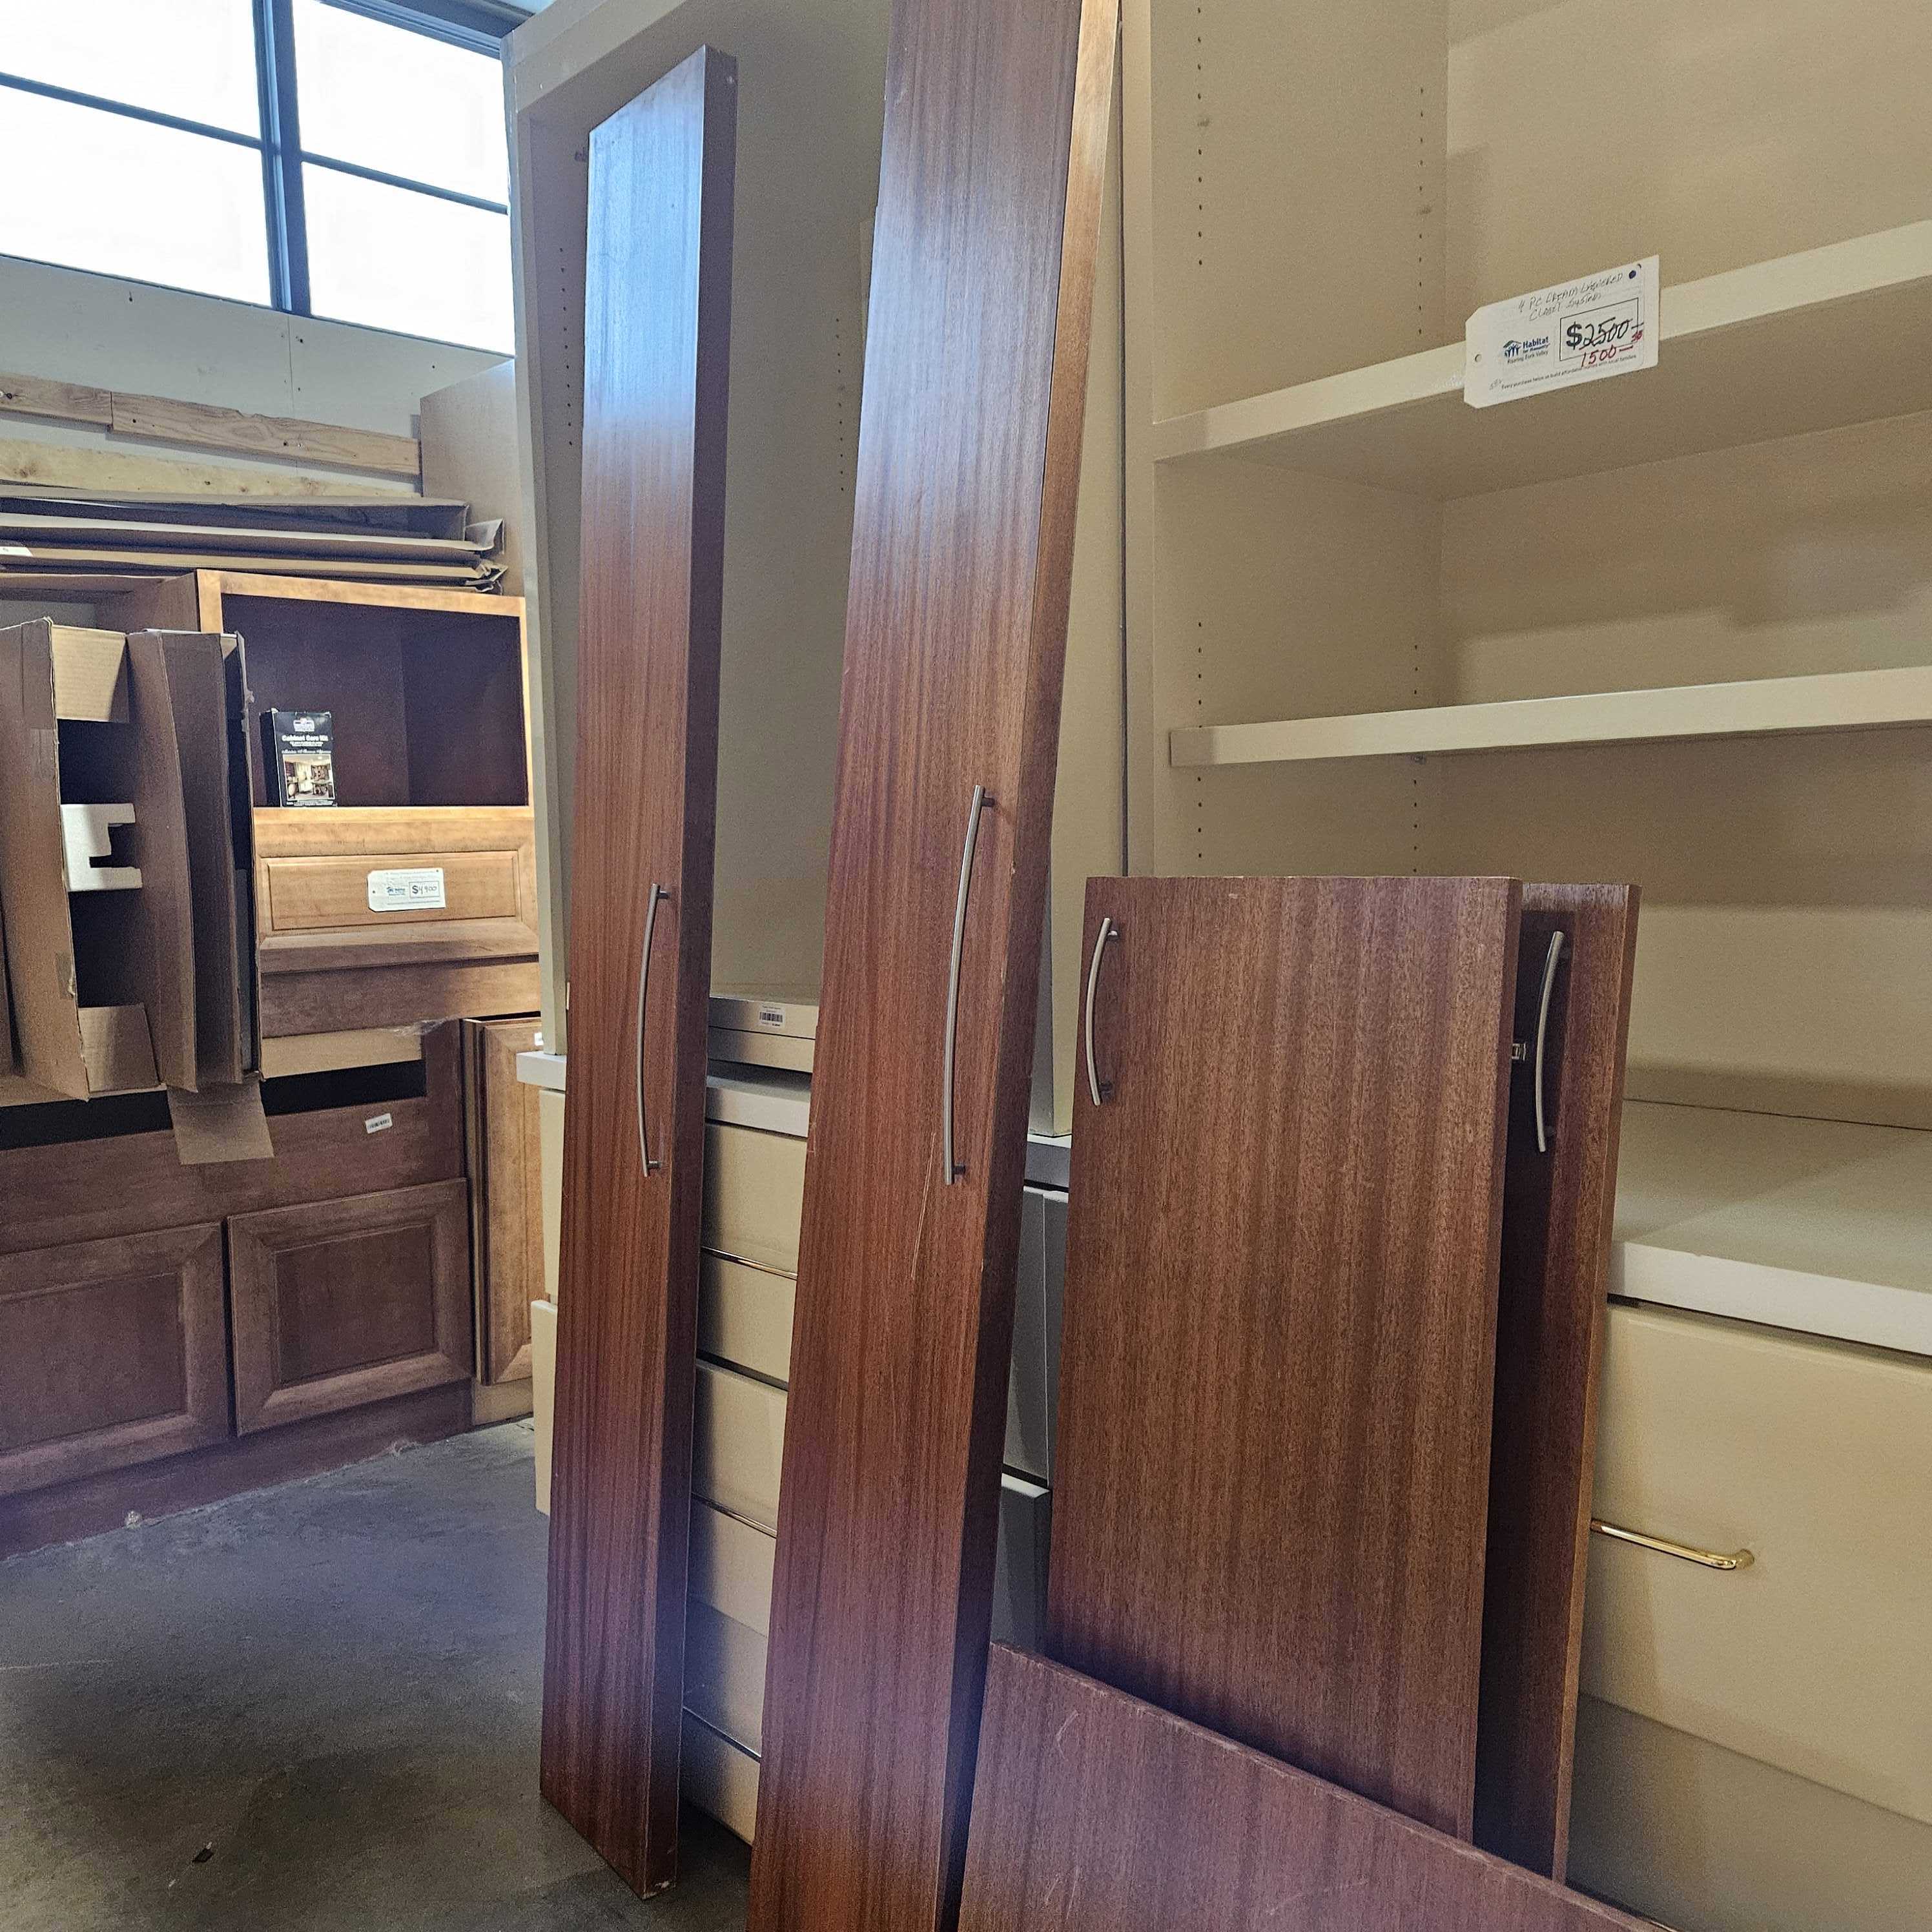 24 Piece 13 Lowers, 10 Uppers, Cubby Shelf, Wall Mount Closet Door,Walk In Pantry Doors, Side Panels Ribbon Sapele Mahogany Kitchen & Pantry Set